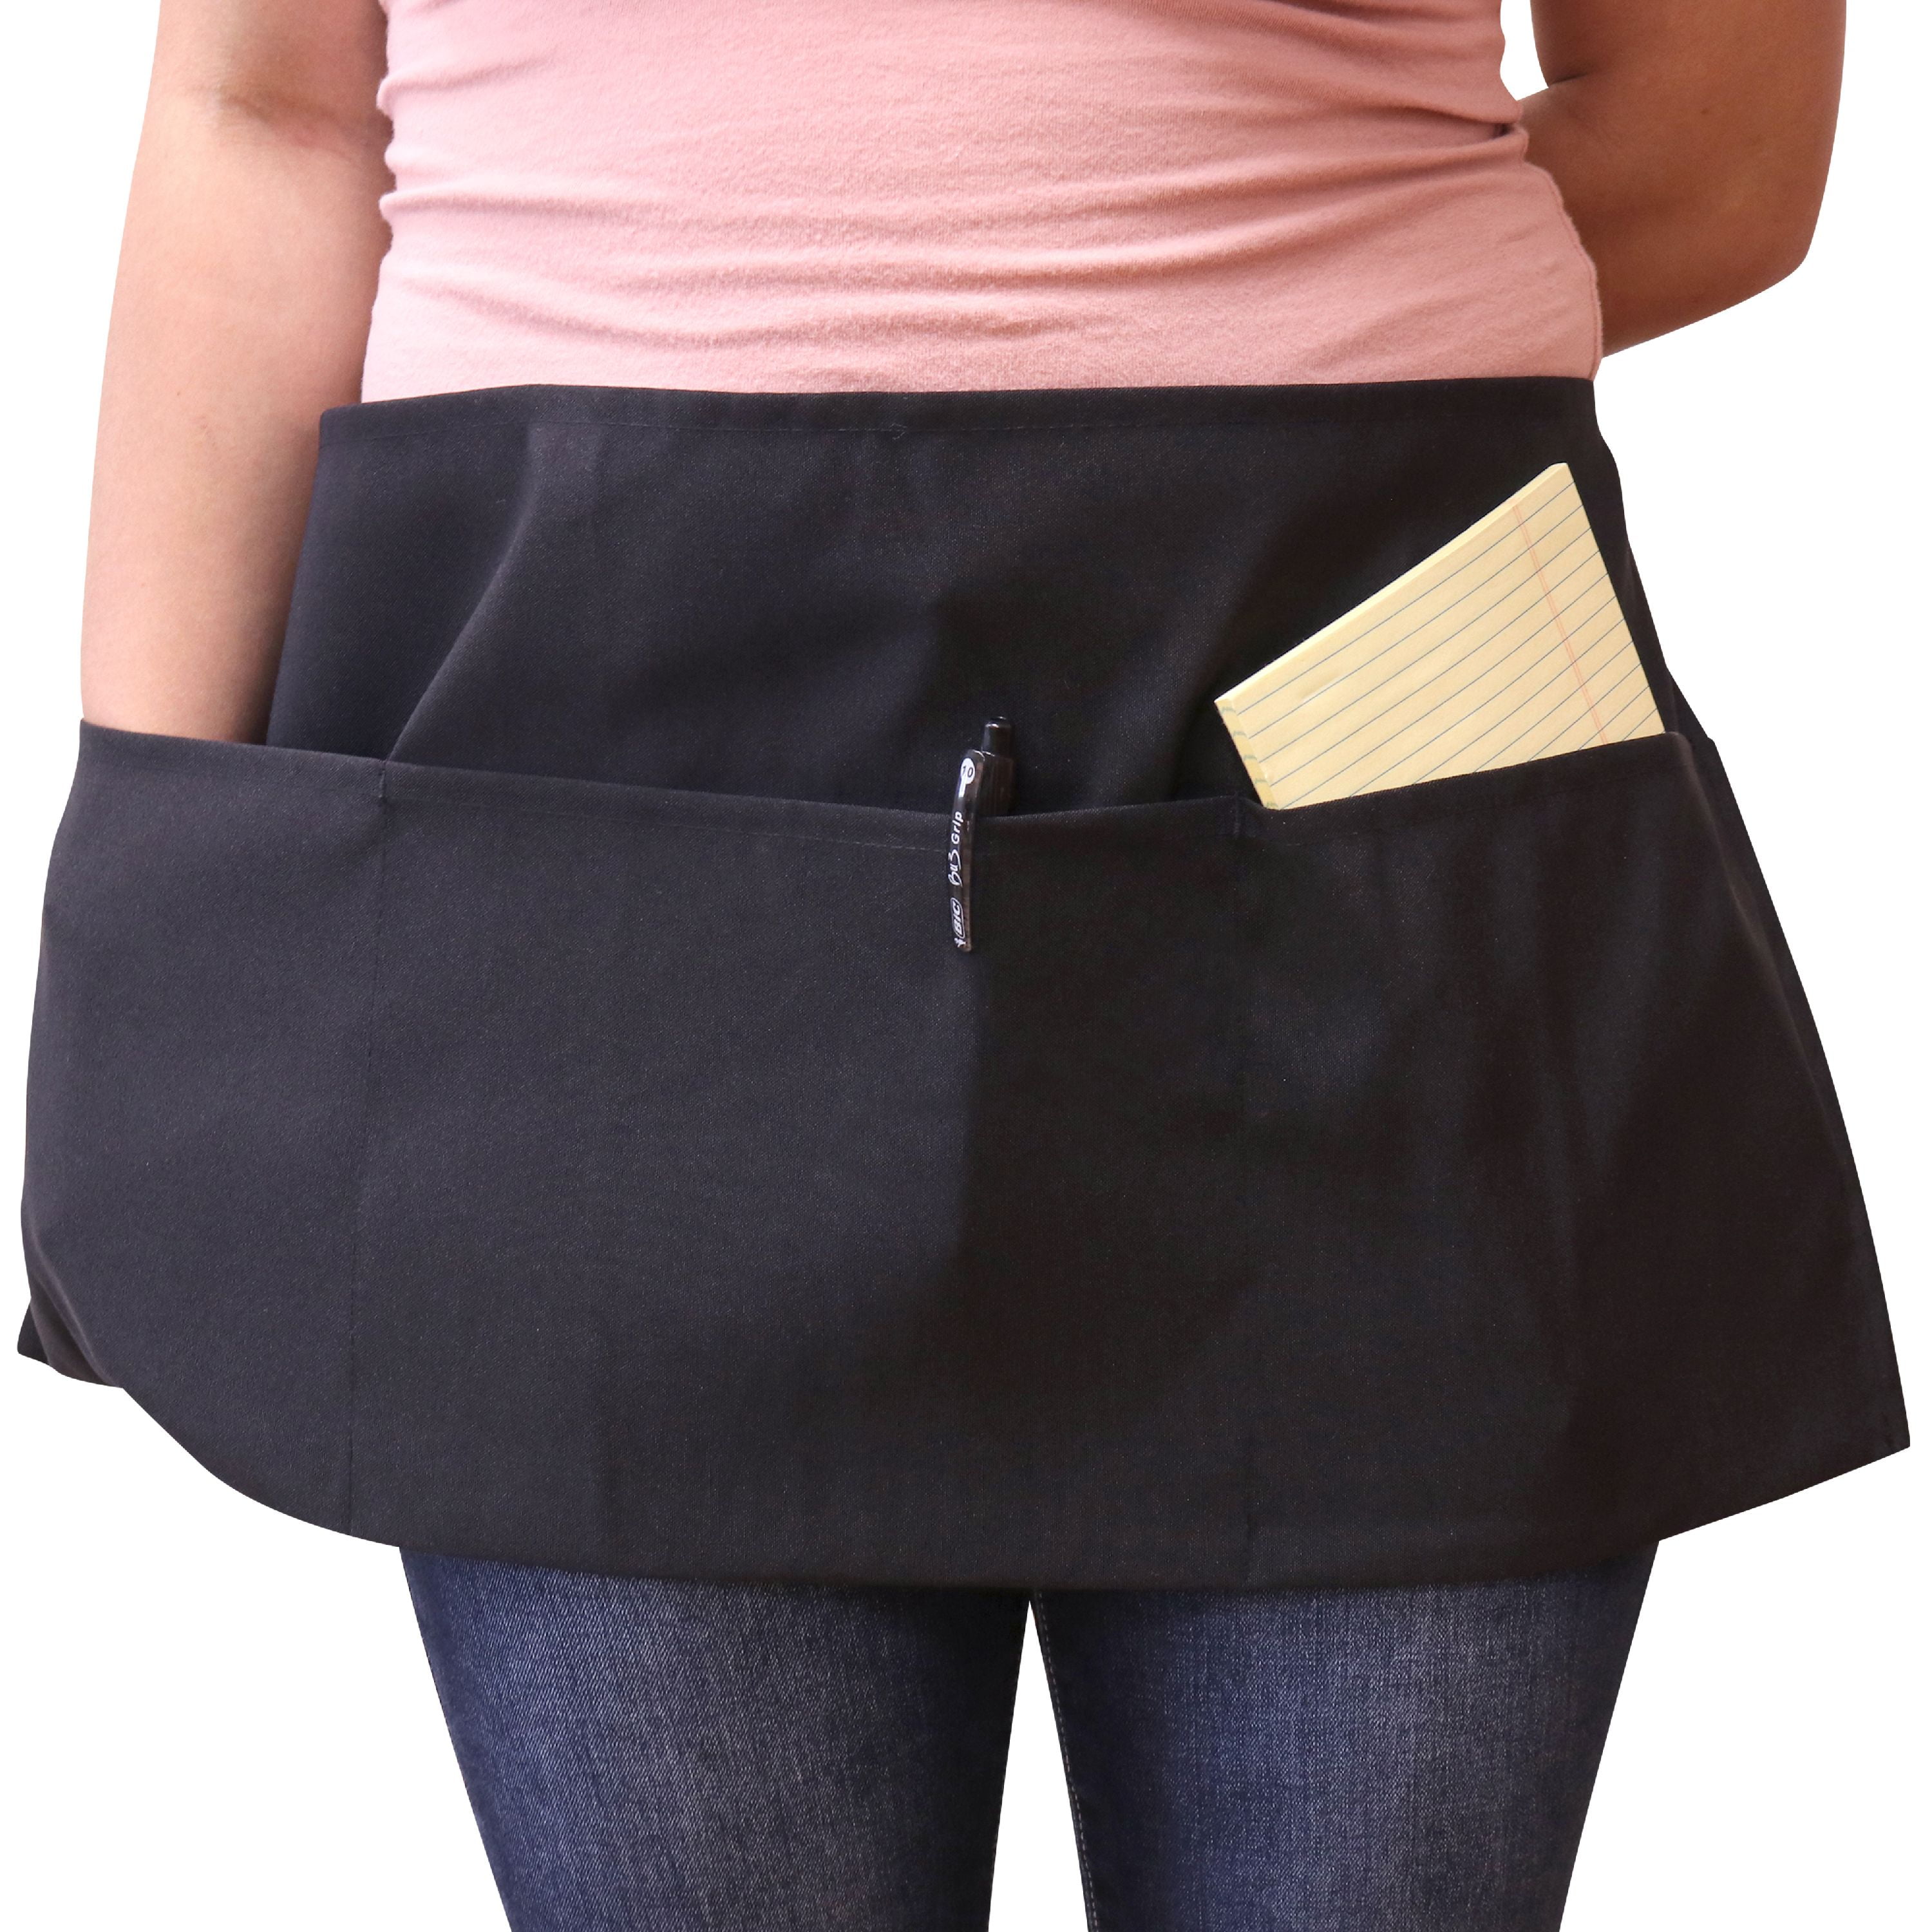 Fluffy Layers 250735 19 x 20 in. Half Body Egg Collecting Apron